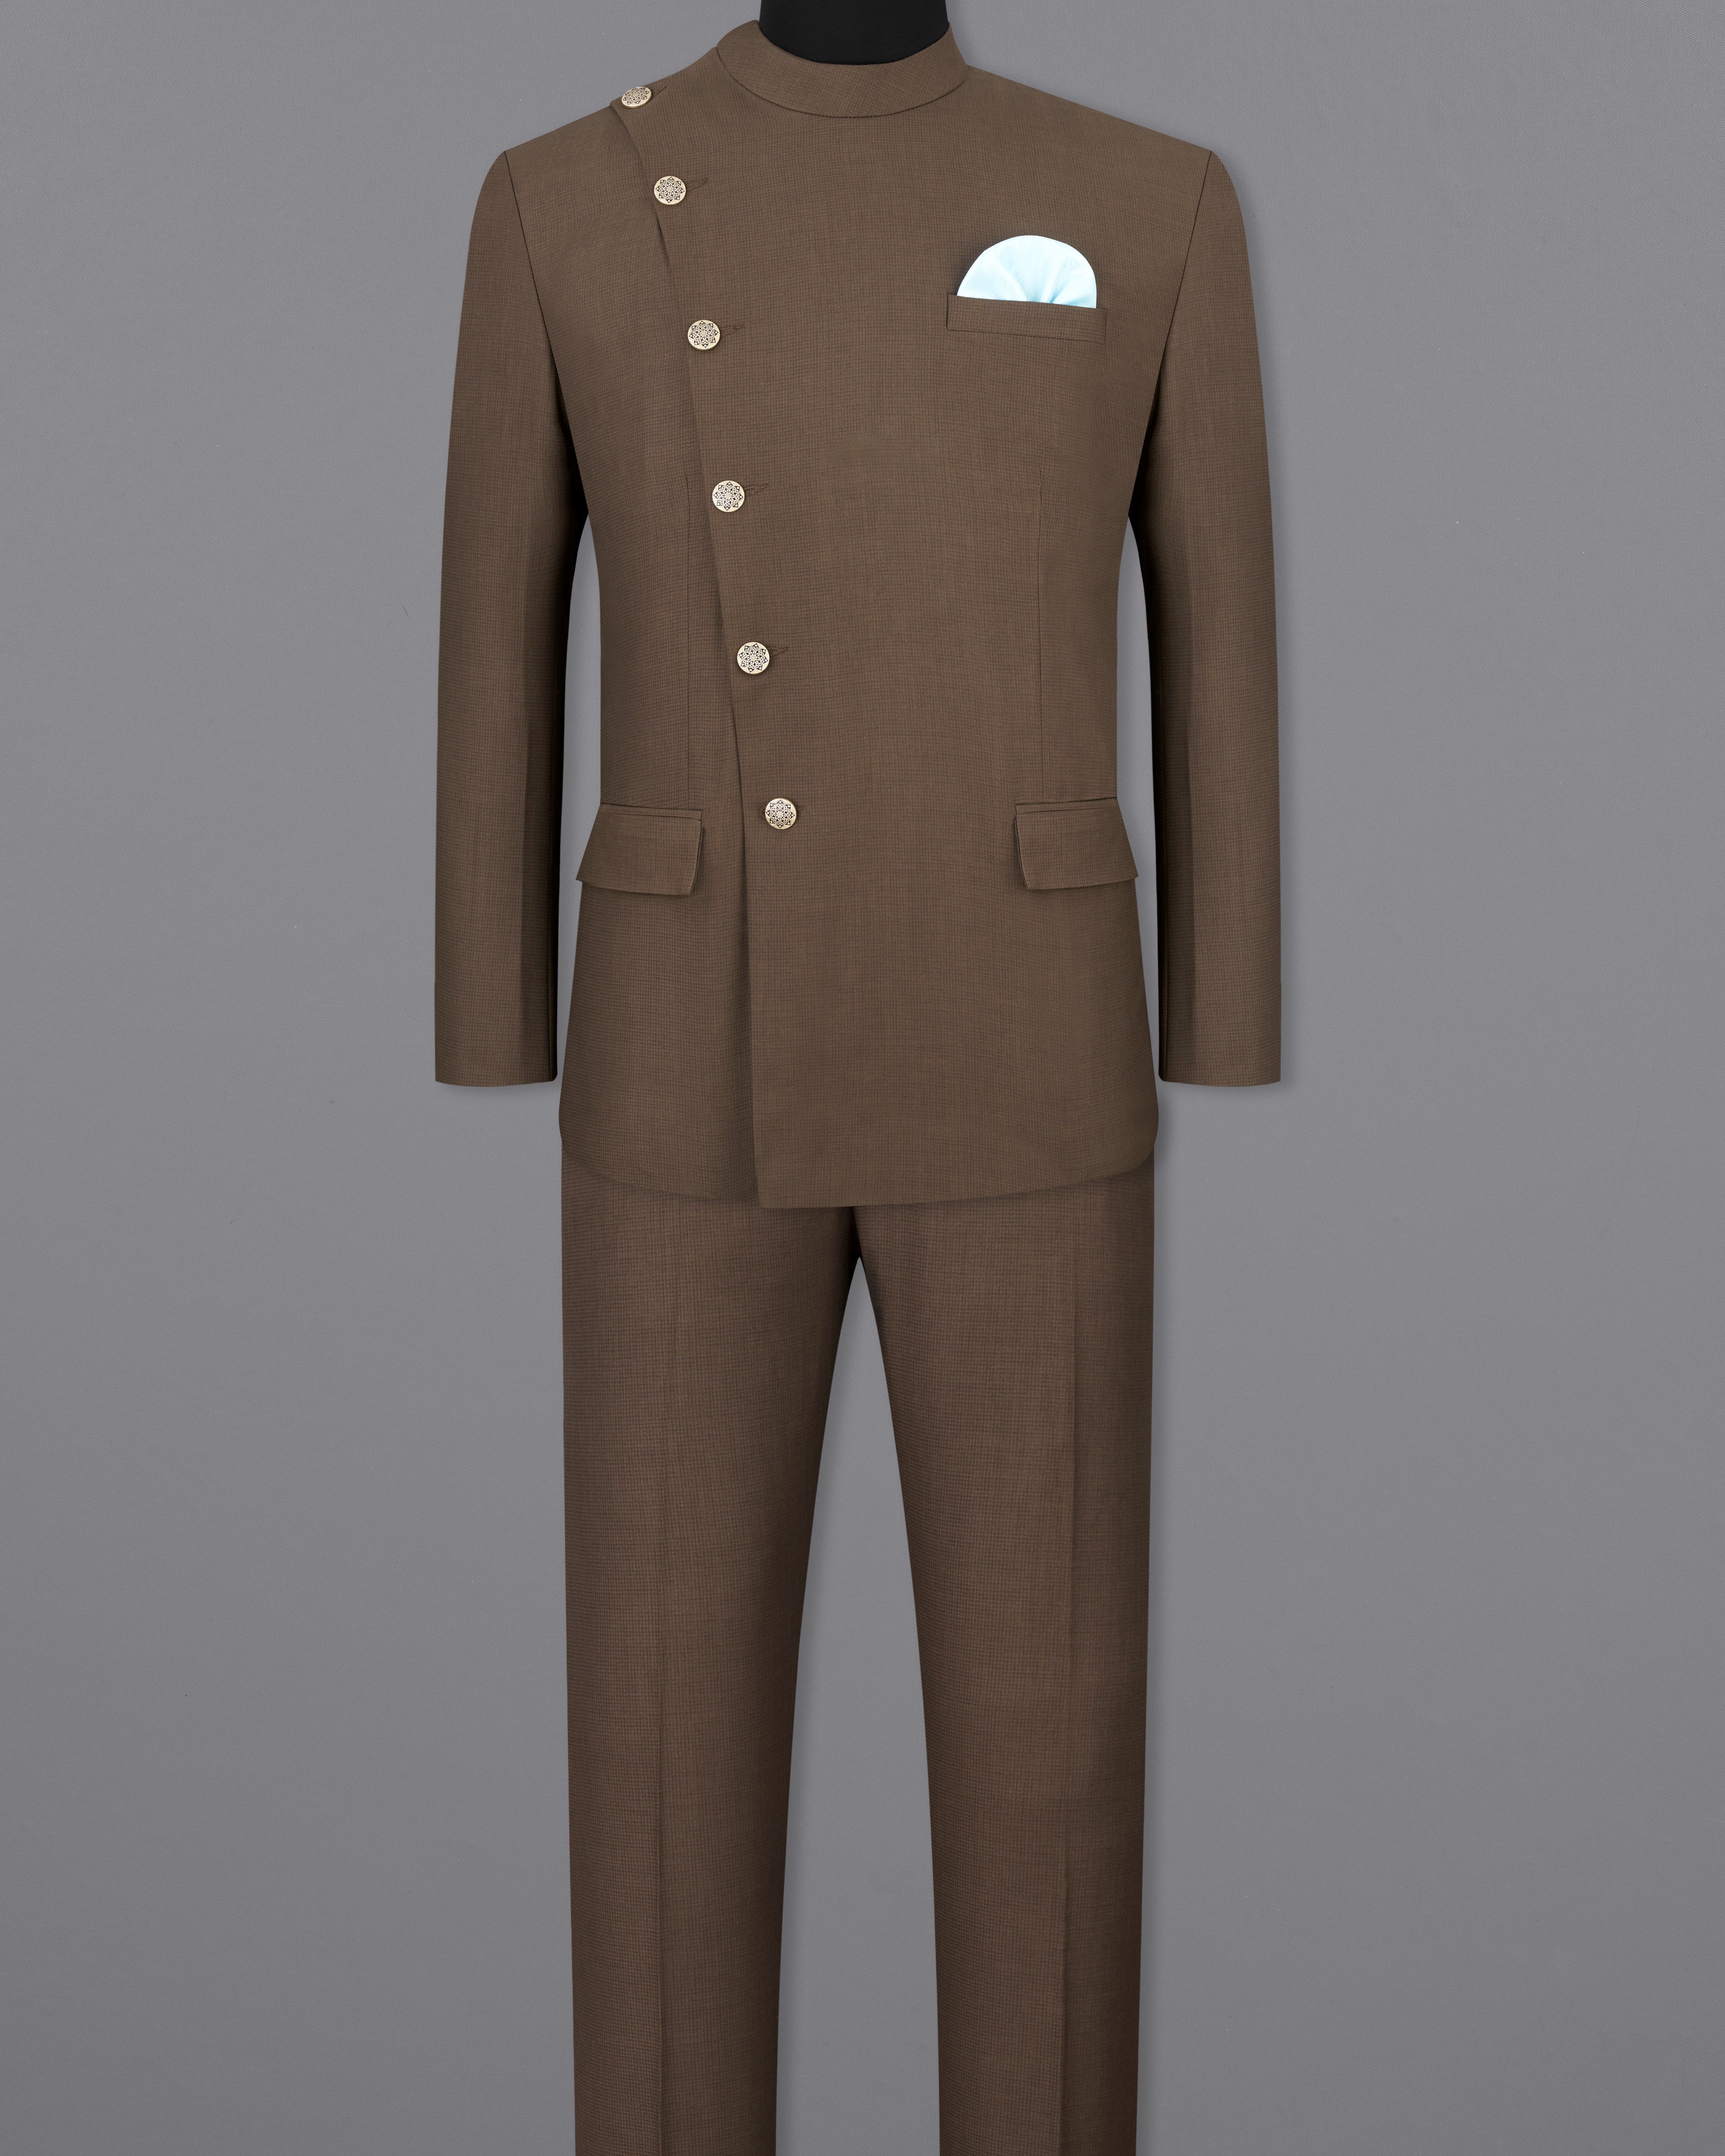 Judge Brown Cross Buttoned Bandhgala Suit ST2534-CBG2-36, ST2534-CBG2-38, ST2534-CBG2-40, ST2534-CBG2-42, ST2534-CBG2-44, ST2534-CBG2-46, ST2534-CBG2-48, ST2534-CBG2-50, ST2534-CBG2-53, ST2534-CBG2-54, ST2534-CBG2-56, ST2534-CBG2-58, ST2534-CBG2-60